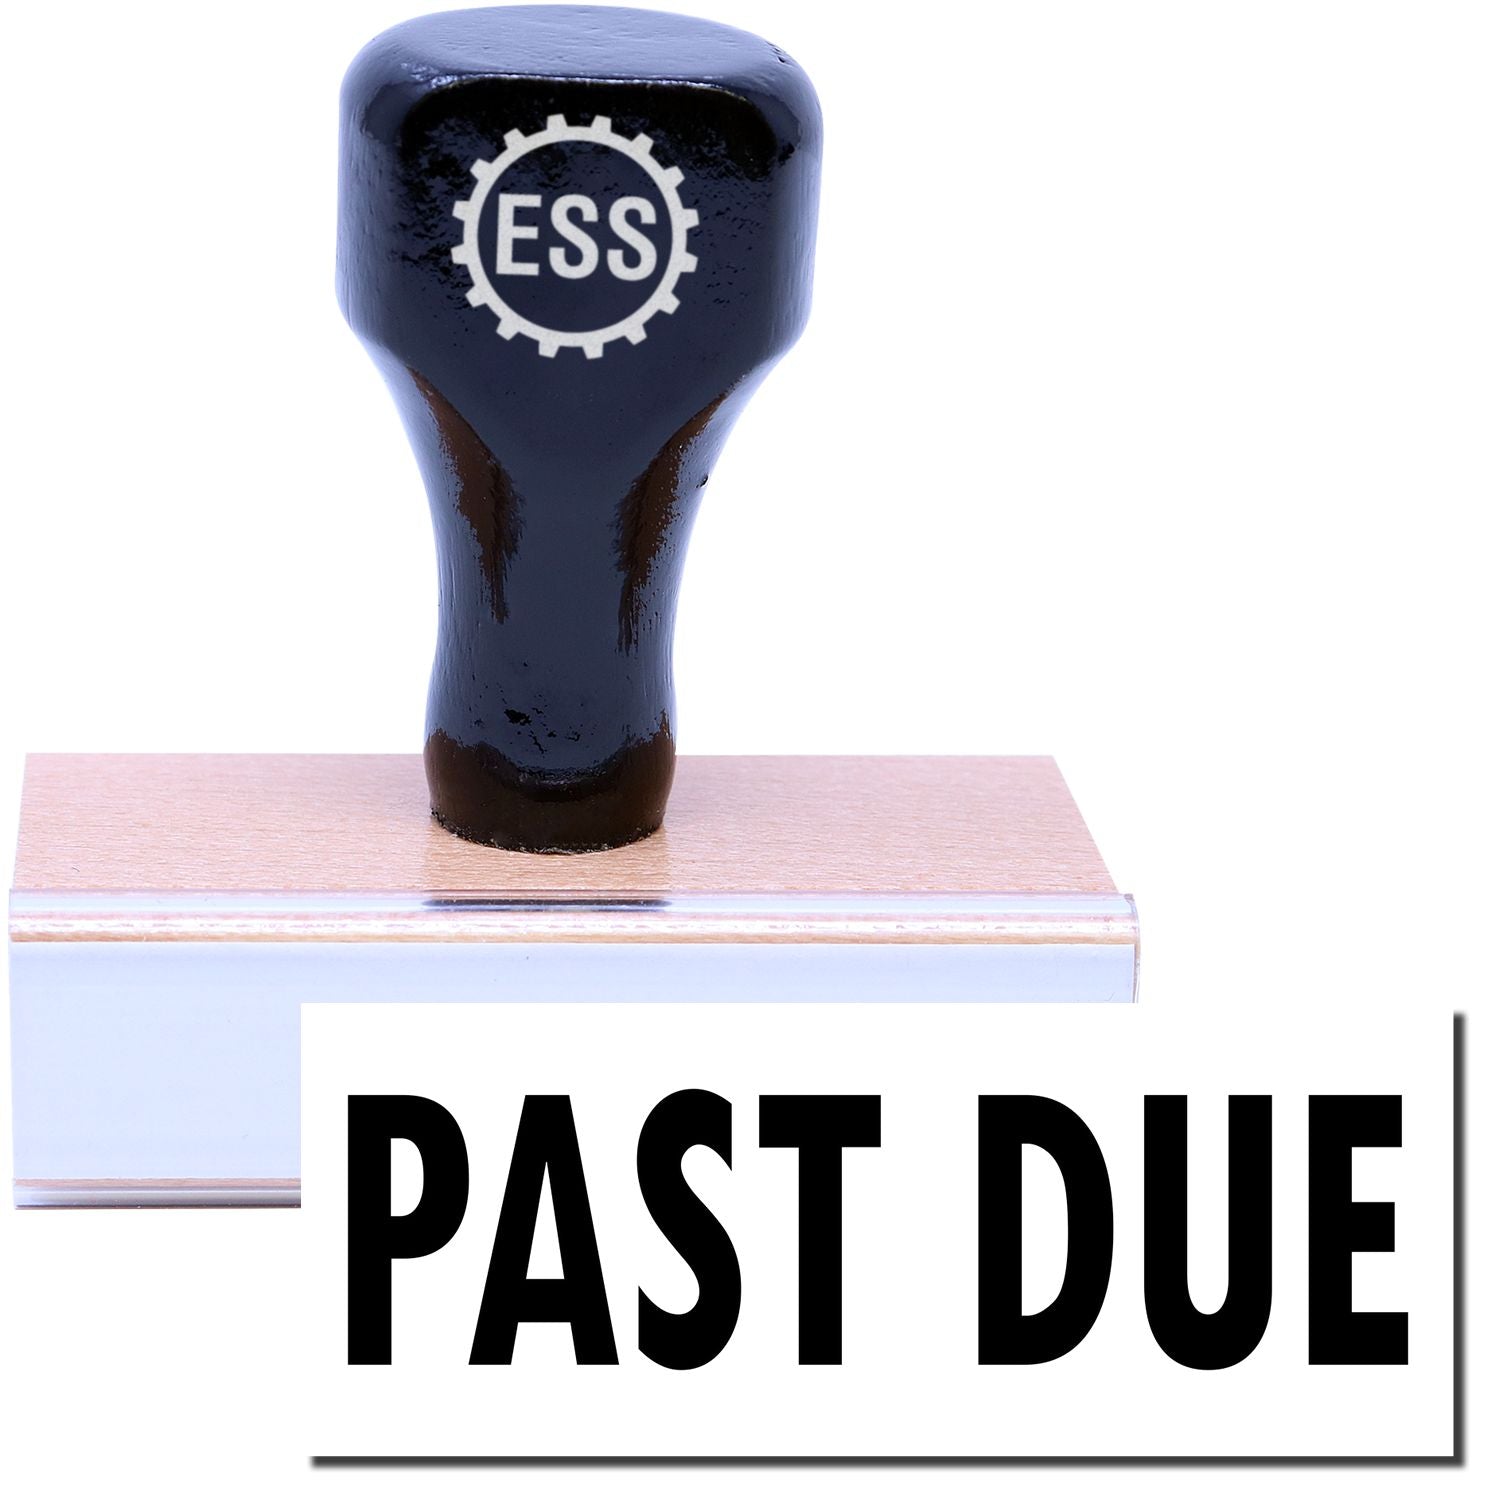 A stock office rubber stamp with a stamped image showing how the text "PAST DUE" in a large font is displayed after stamping.